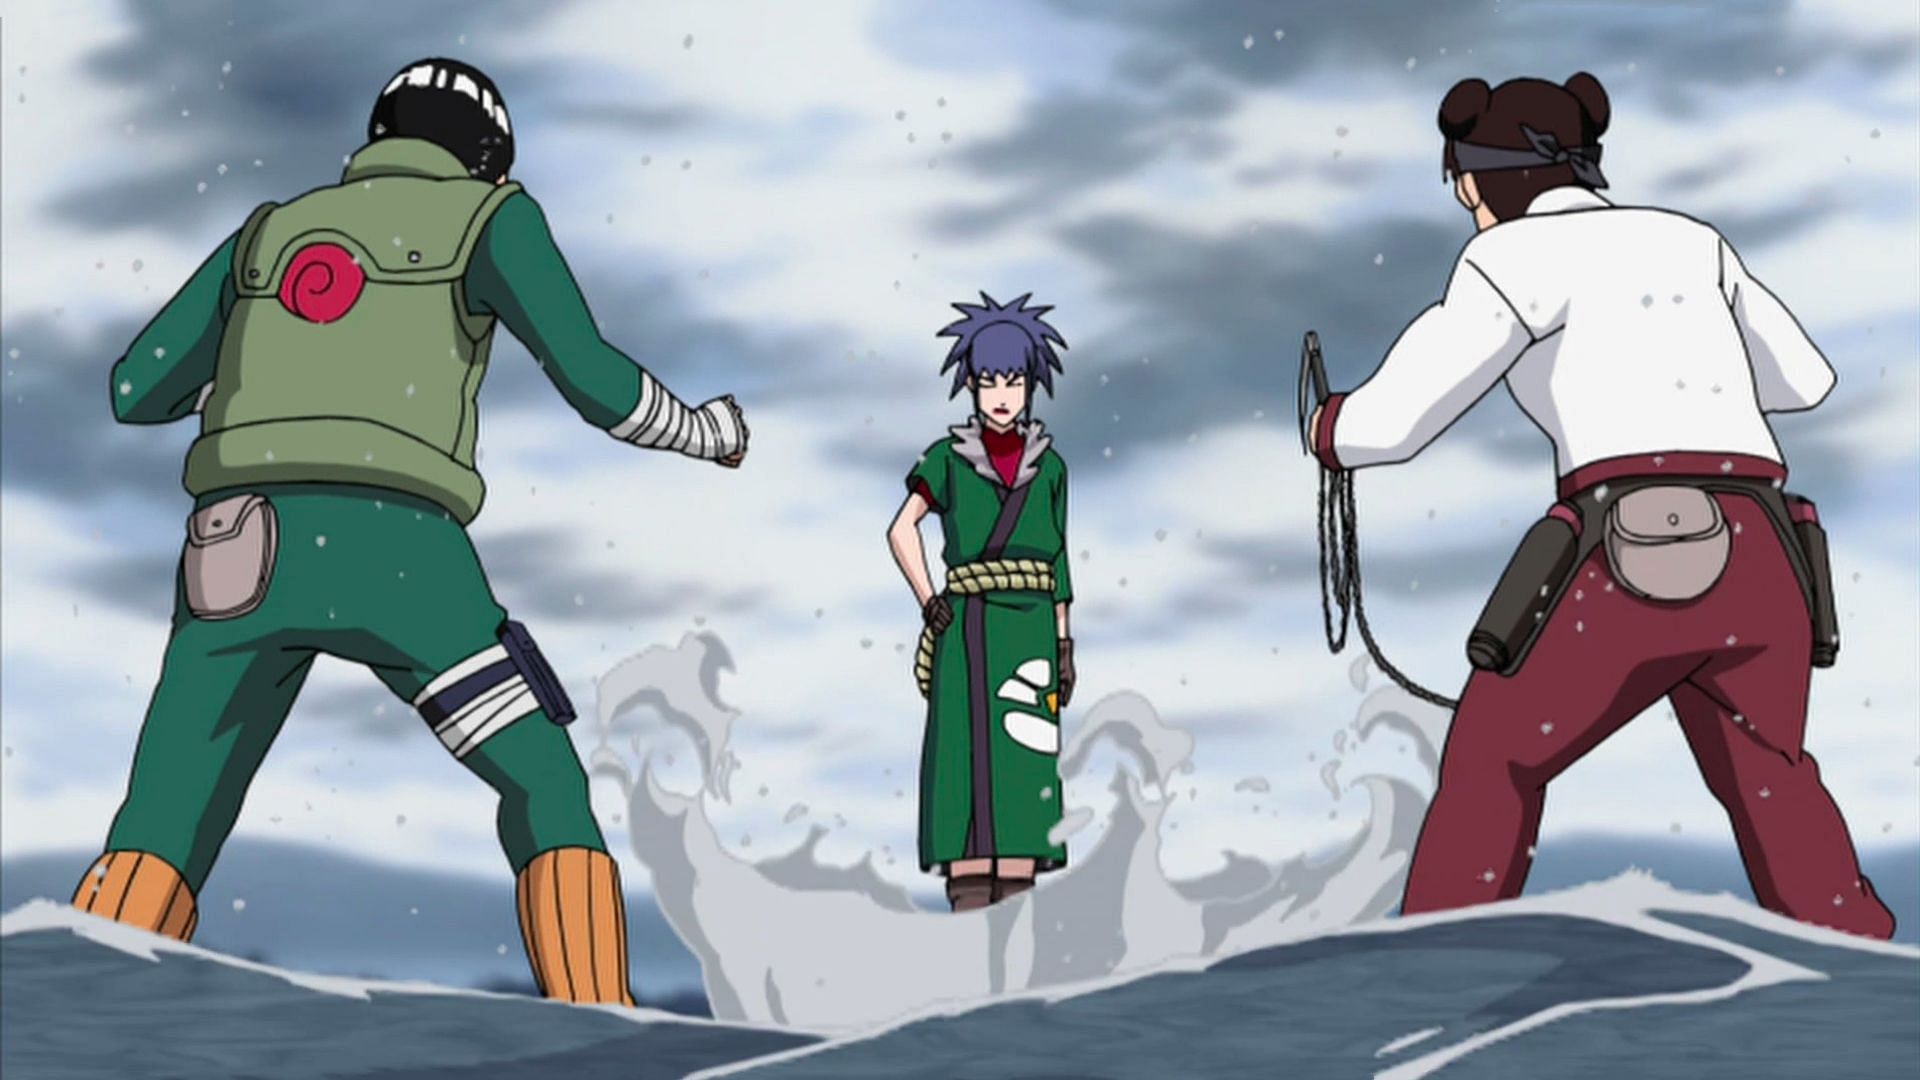 Rock Lee and Tenten on a mission in the Naruto series (Image via Pierrot)